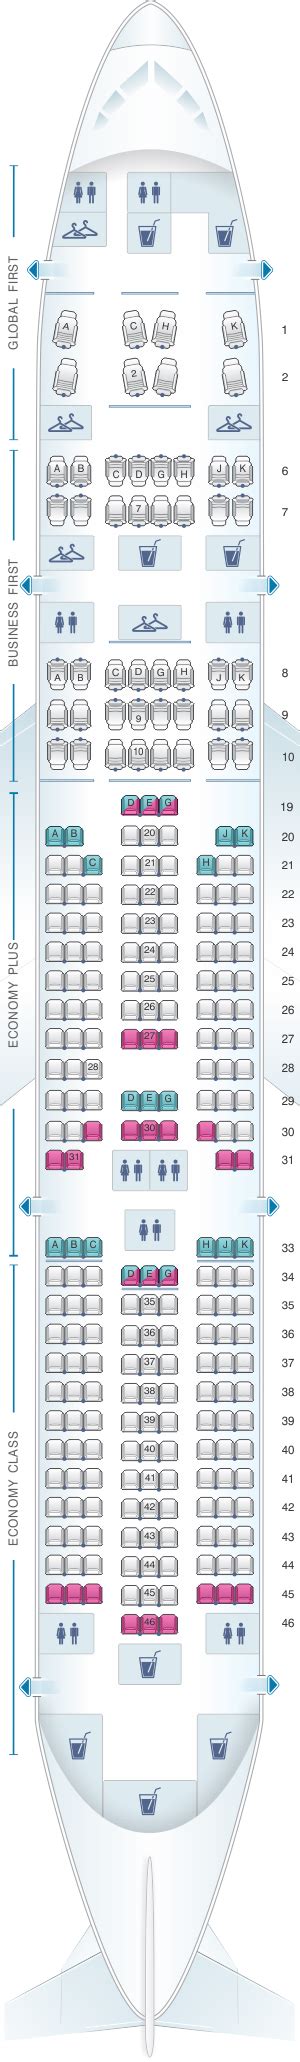 United 777 200 seat map. United Airlines - Airline Tickets, Travel Deals and Flights If you're seeing this message, that means JavaScript has been disabled on your browser, please enable JS ... 